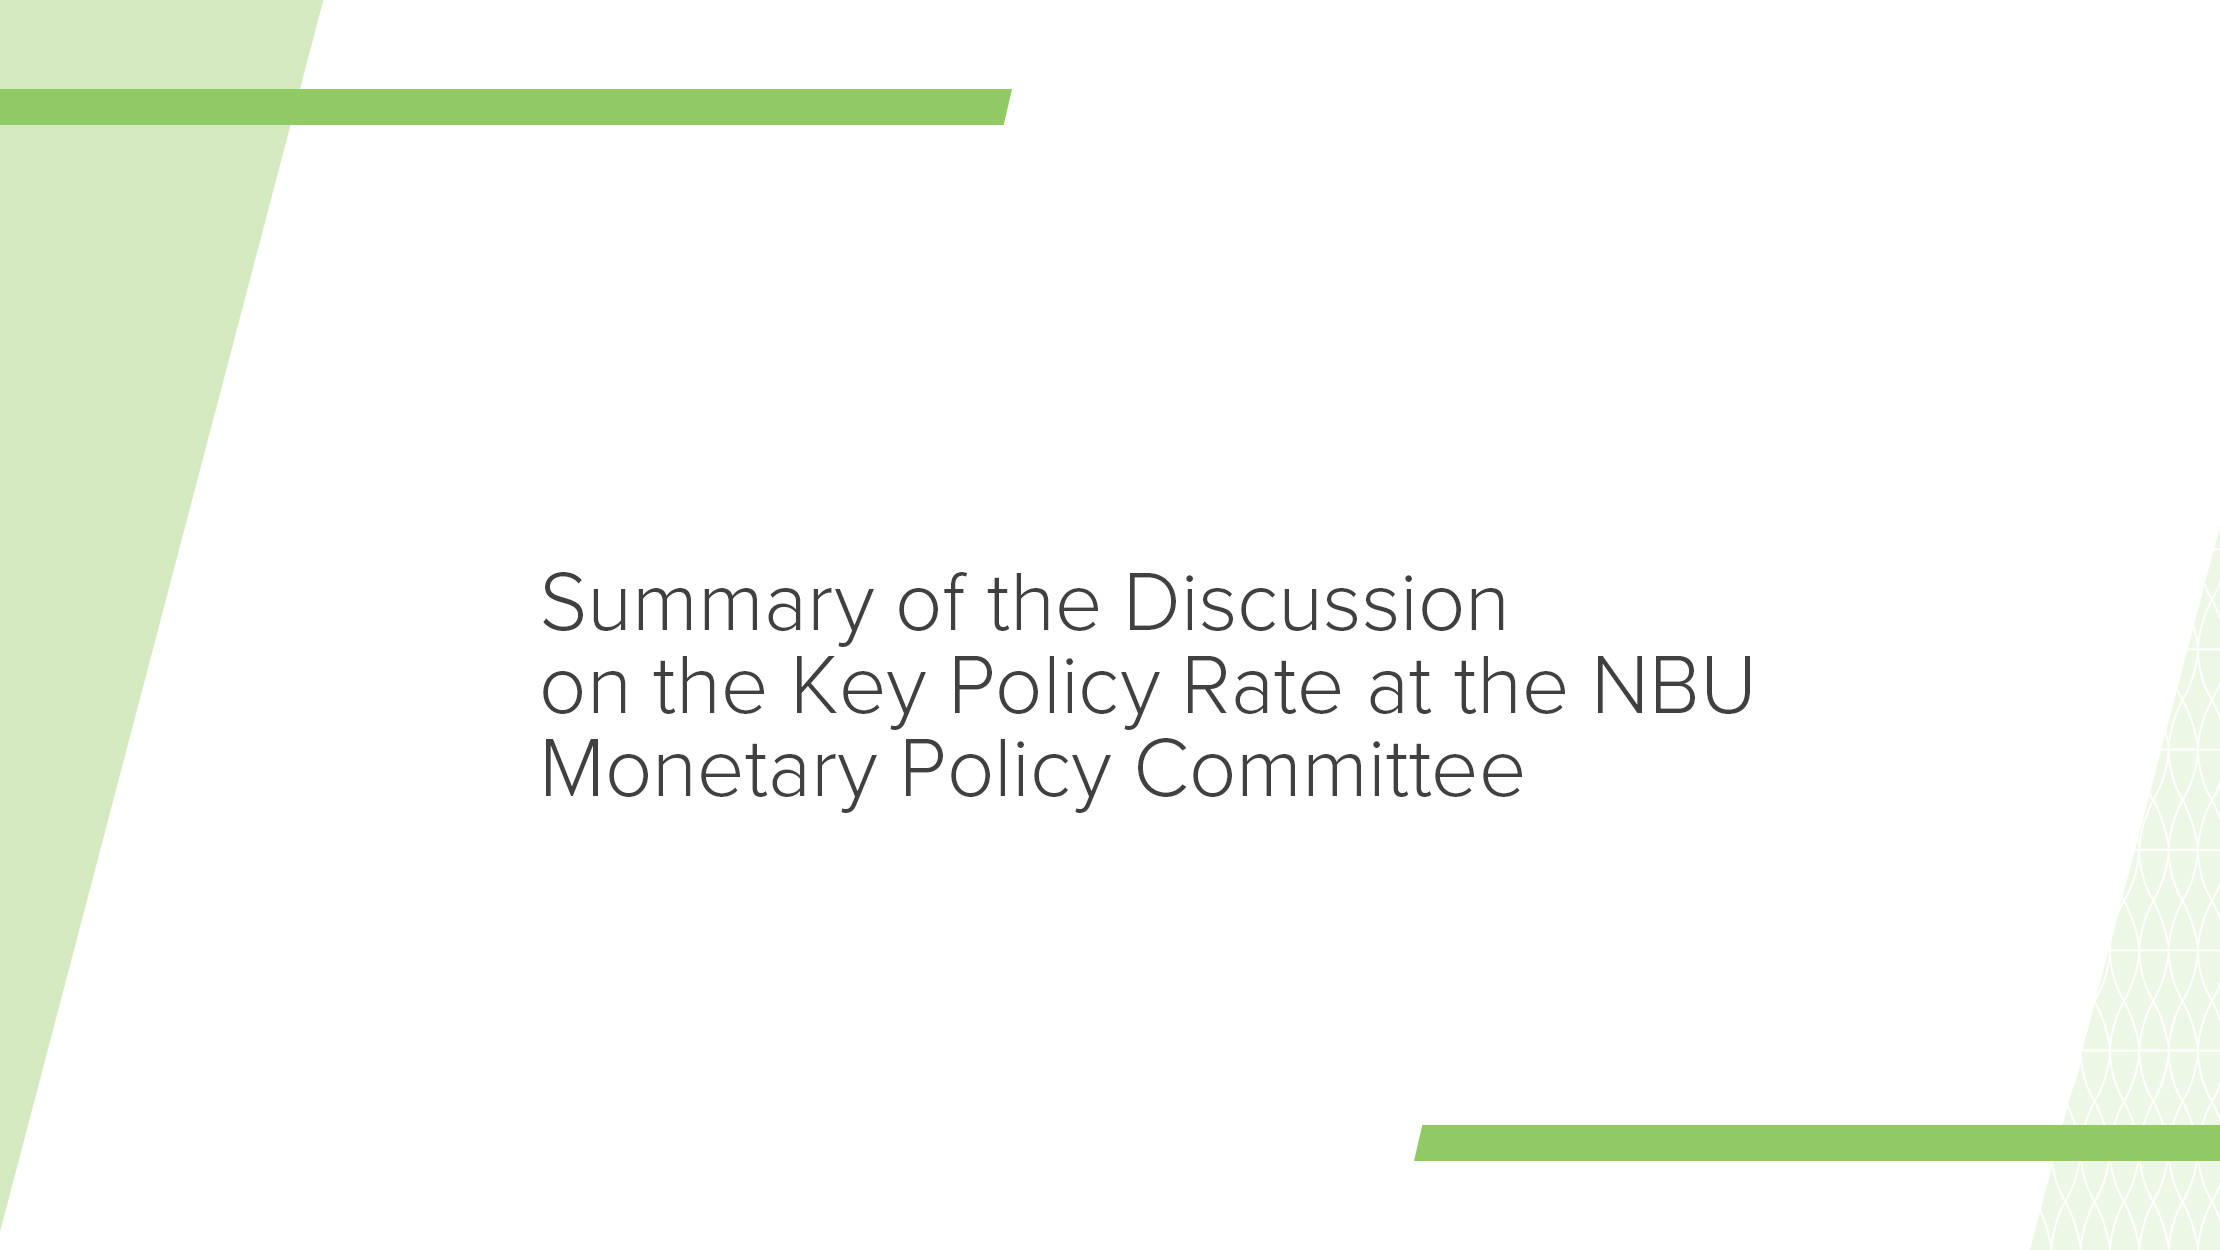 Summary of Key Policy Rate Discussion by NBU Monetary Policy Committee on 21 July 2021